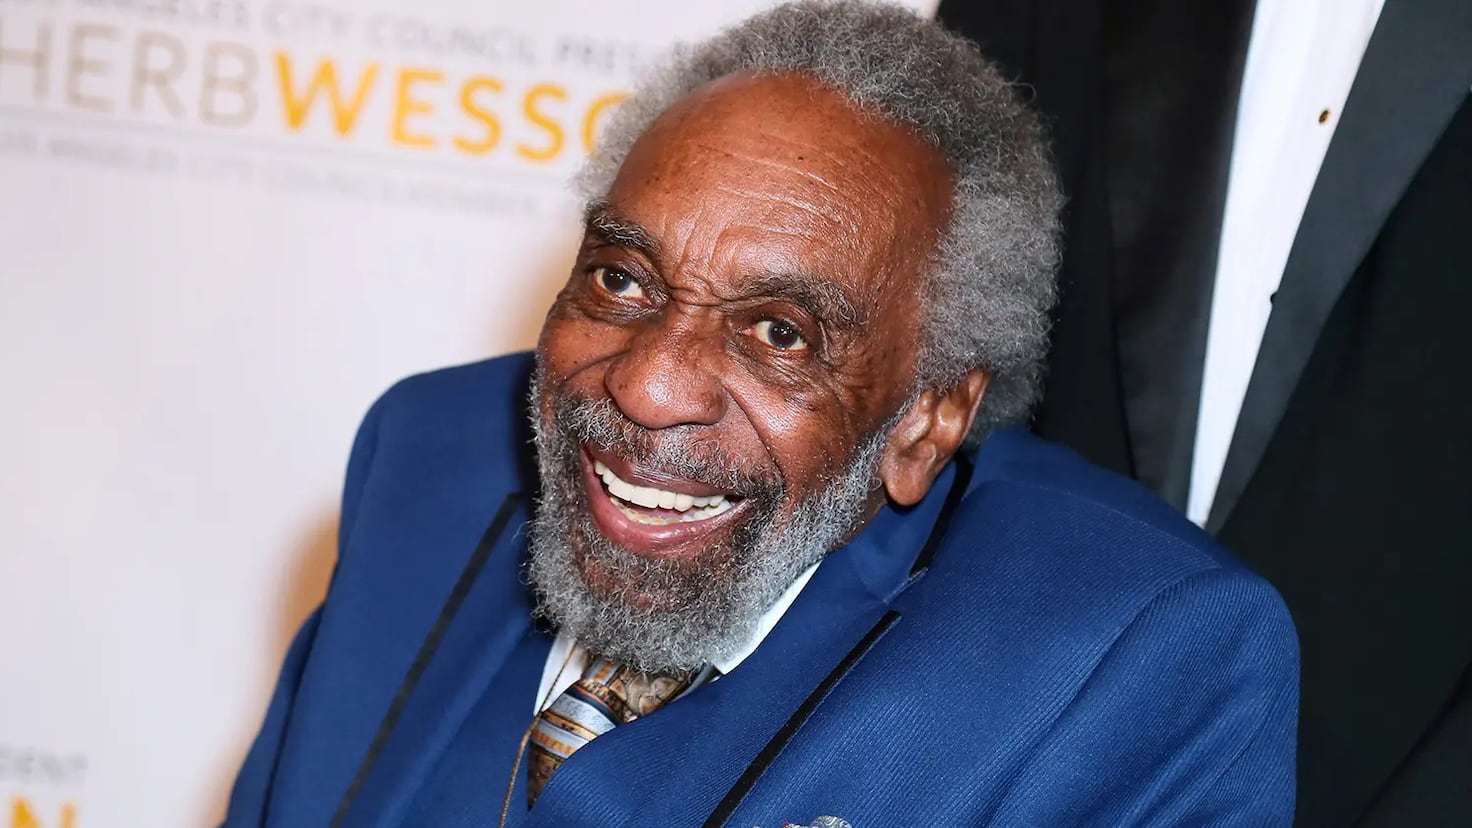 Bill Cobbs dies at 90: What was the cause of death?